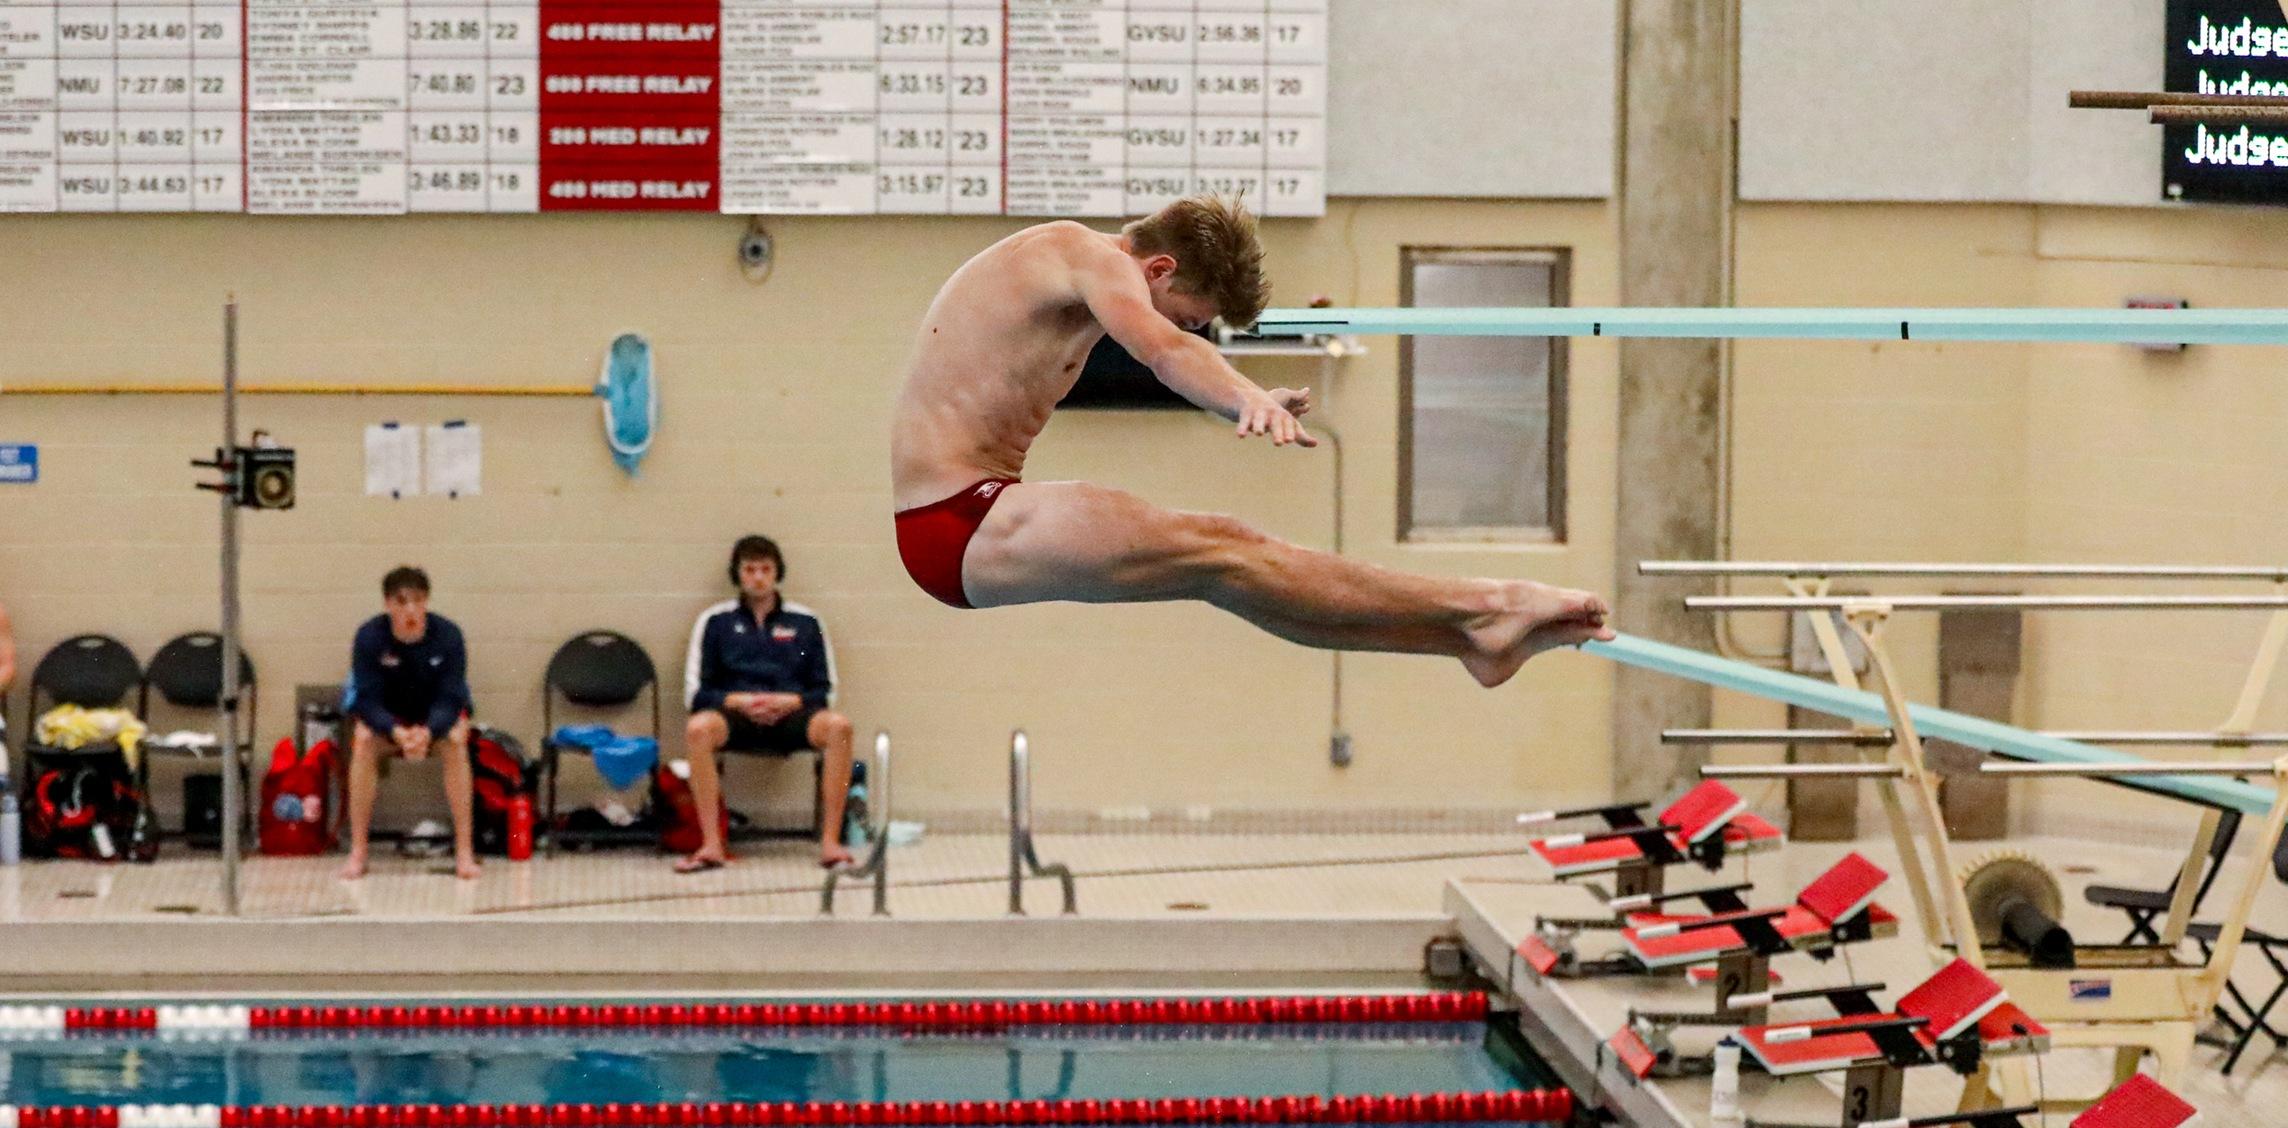 Cardinals Compete at First Day of NCAA DII Swimming & Diving Championships